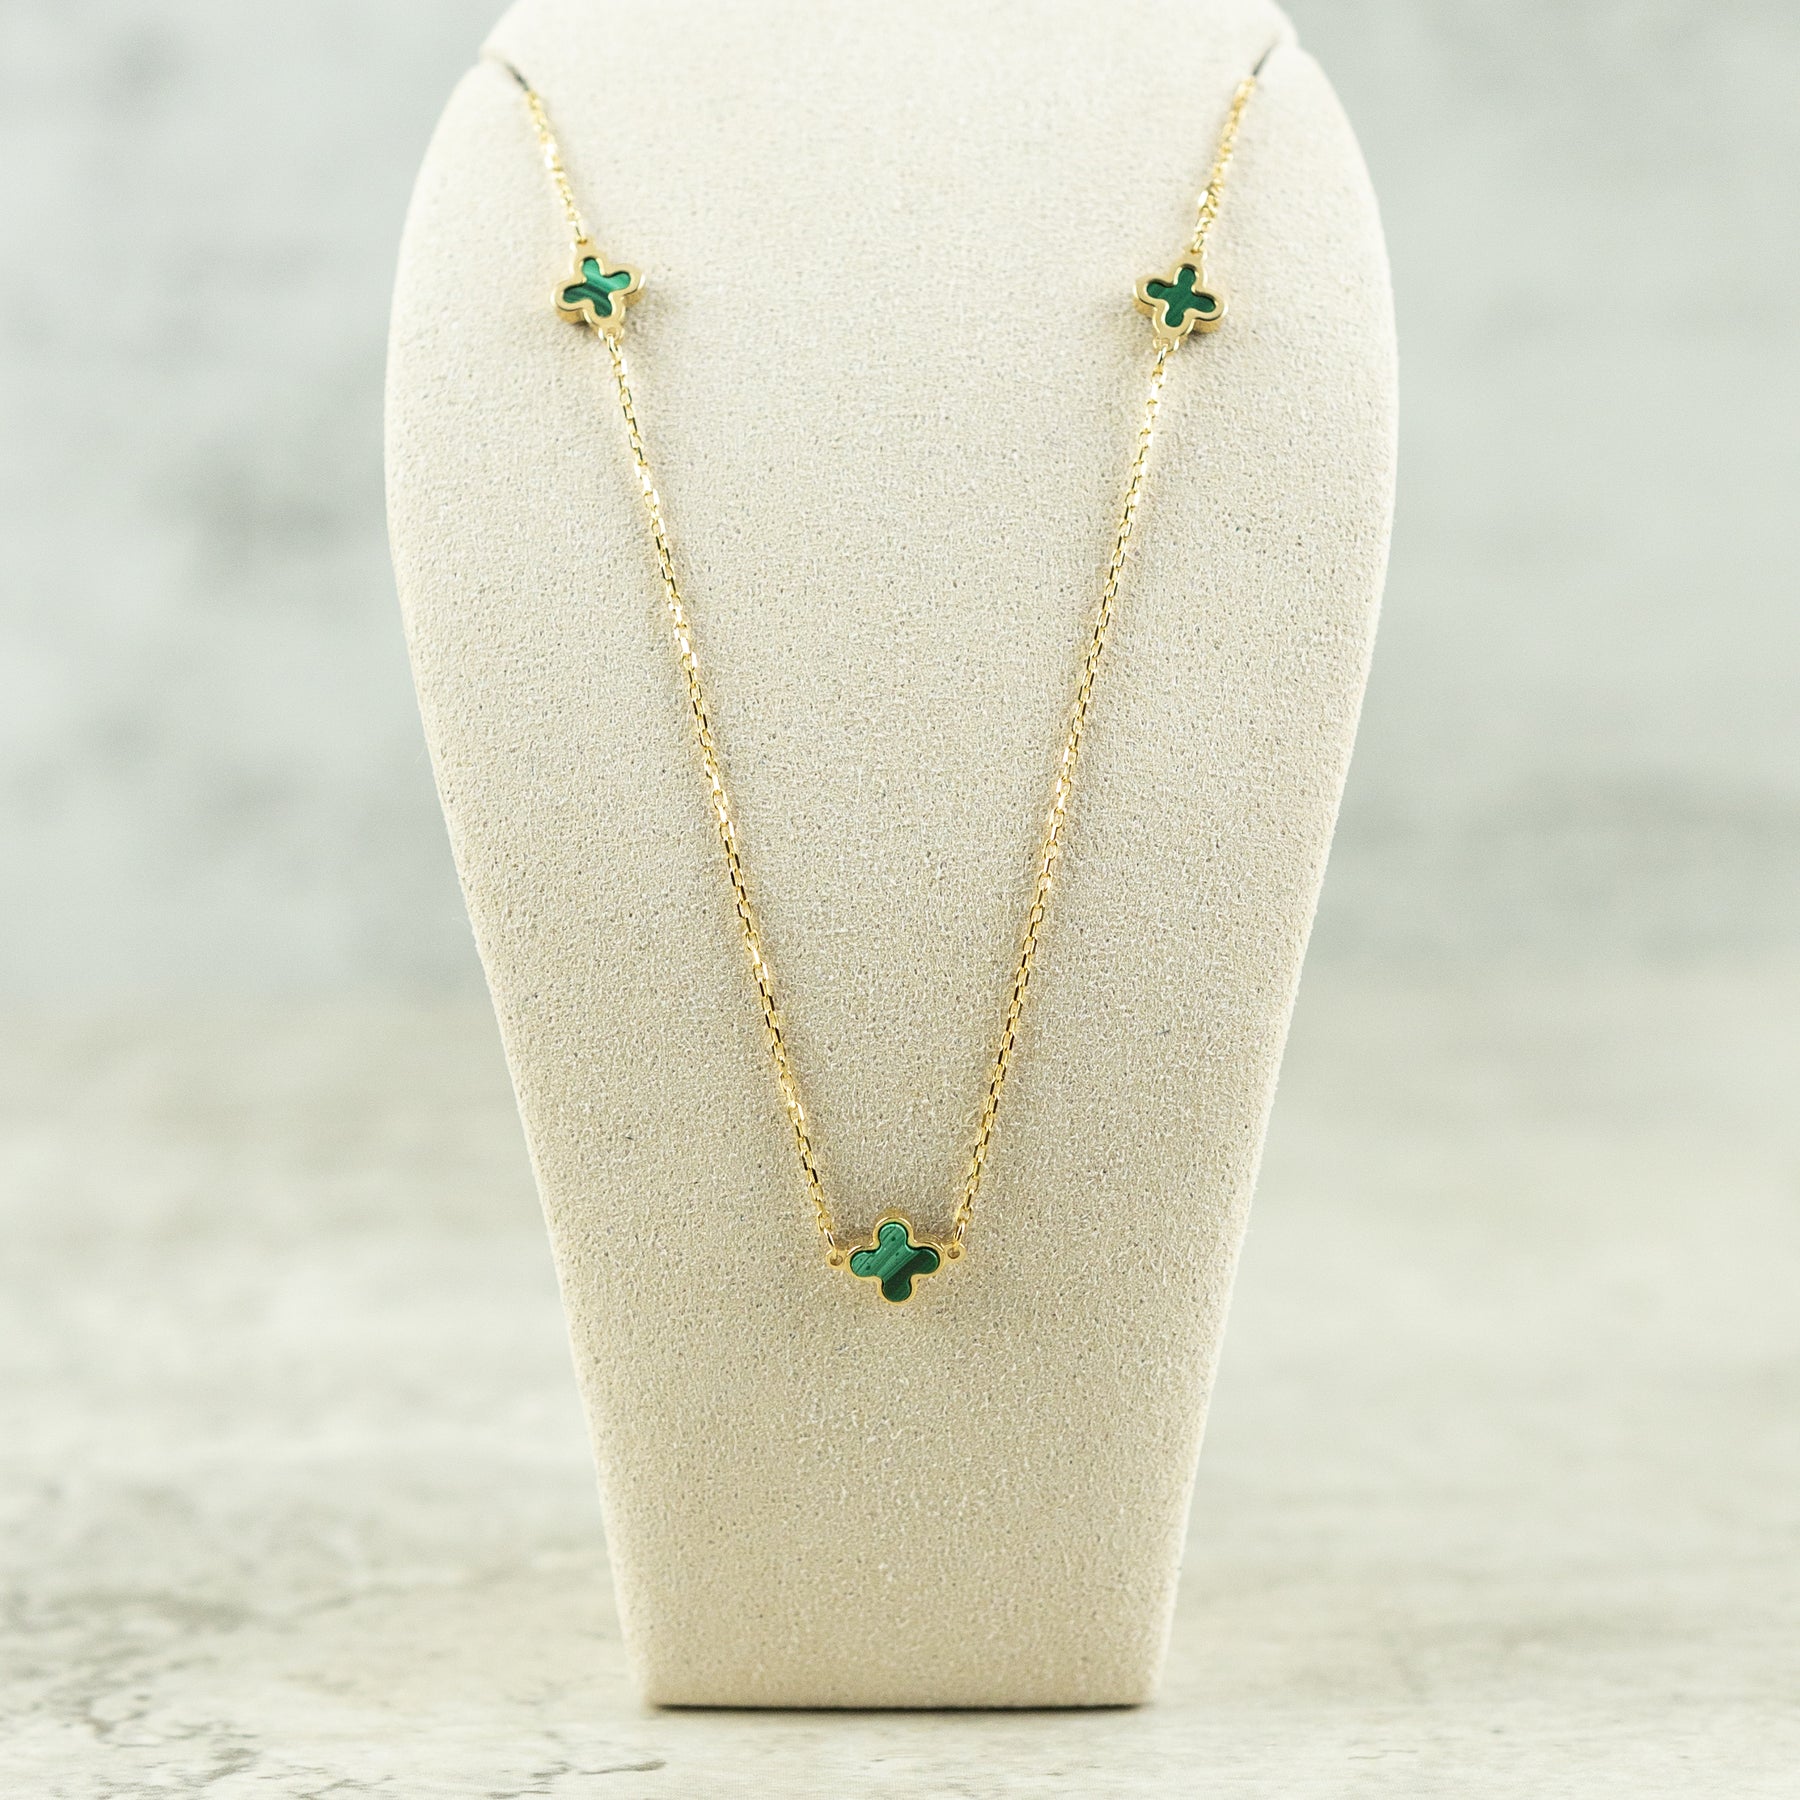 Designer Inspired 9ct Yellow Gold 3 Malachite Petal Necklace AT RR JEWELLERS YARM